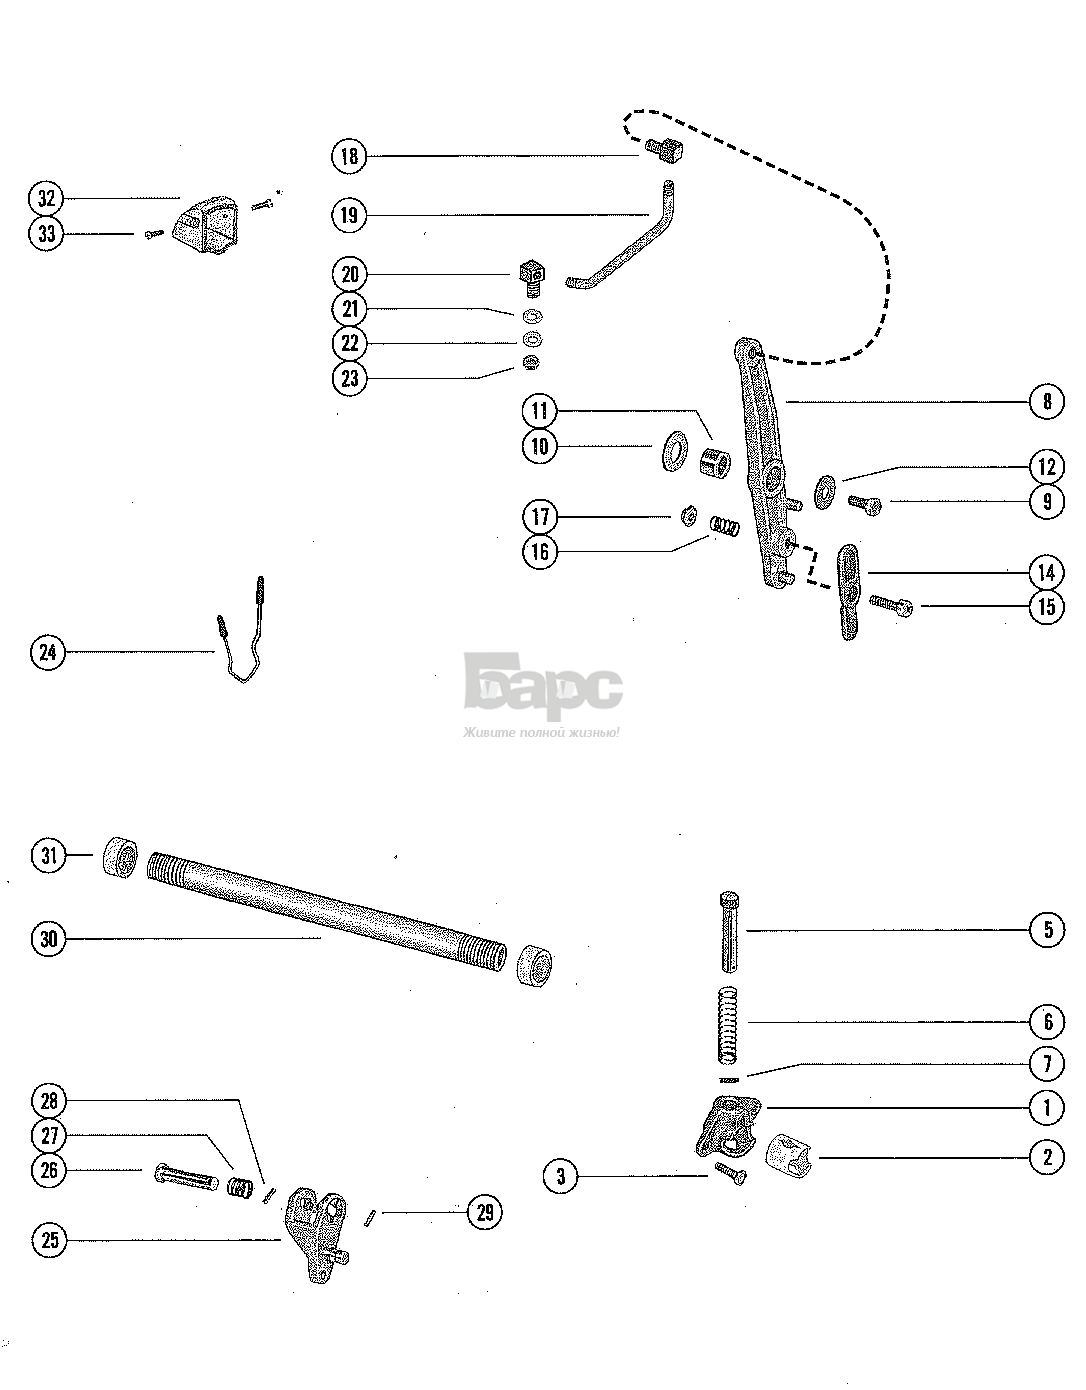 REMOTE CONTROL ATTACHMENT PARTS - SERIAL GROUP #2 (ELECTRIC)